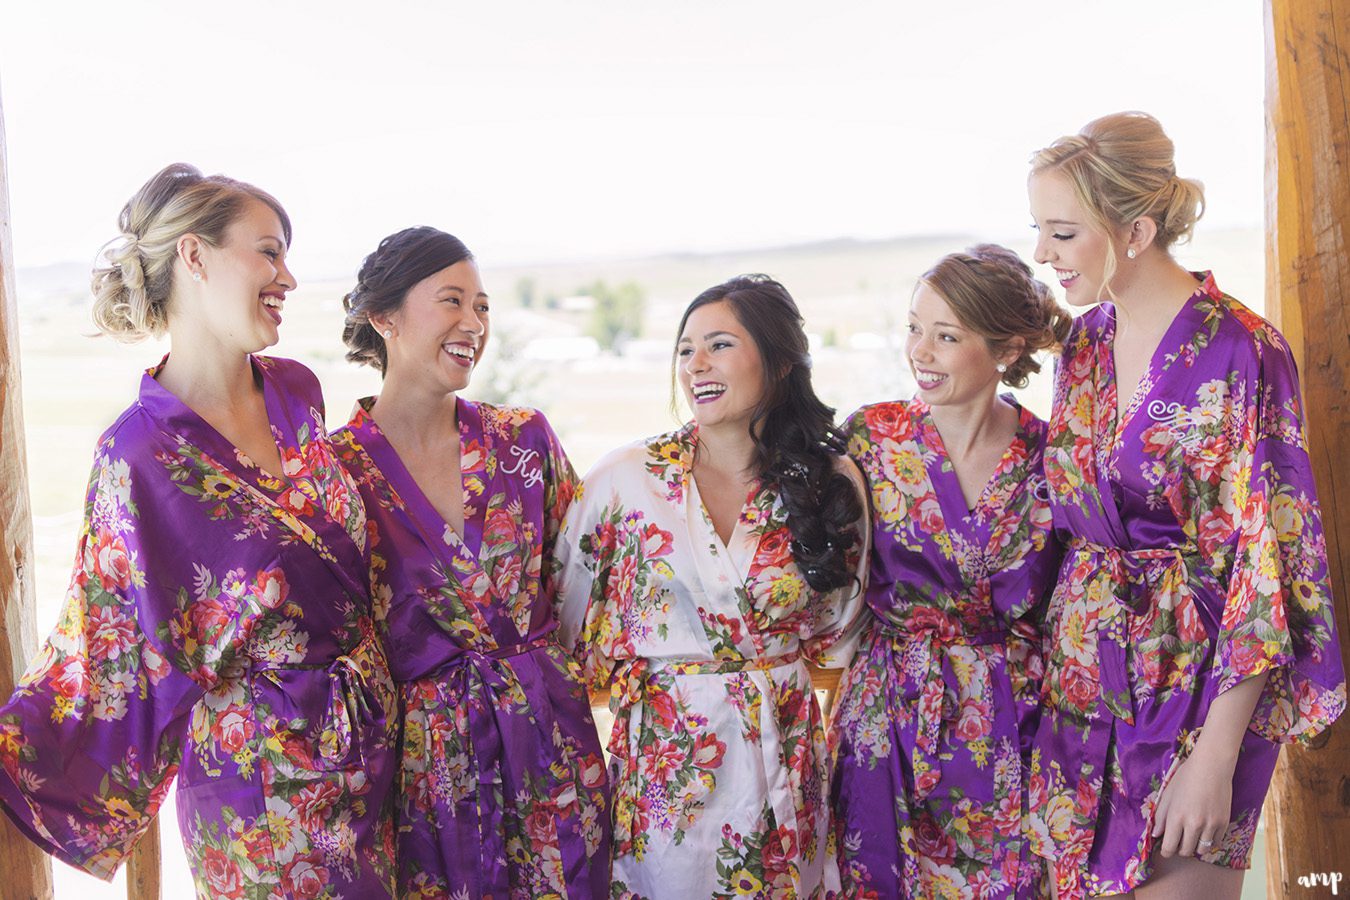 Bridesmaids in matching robes getting ready